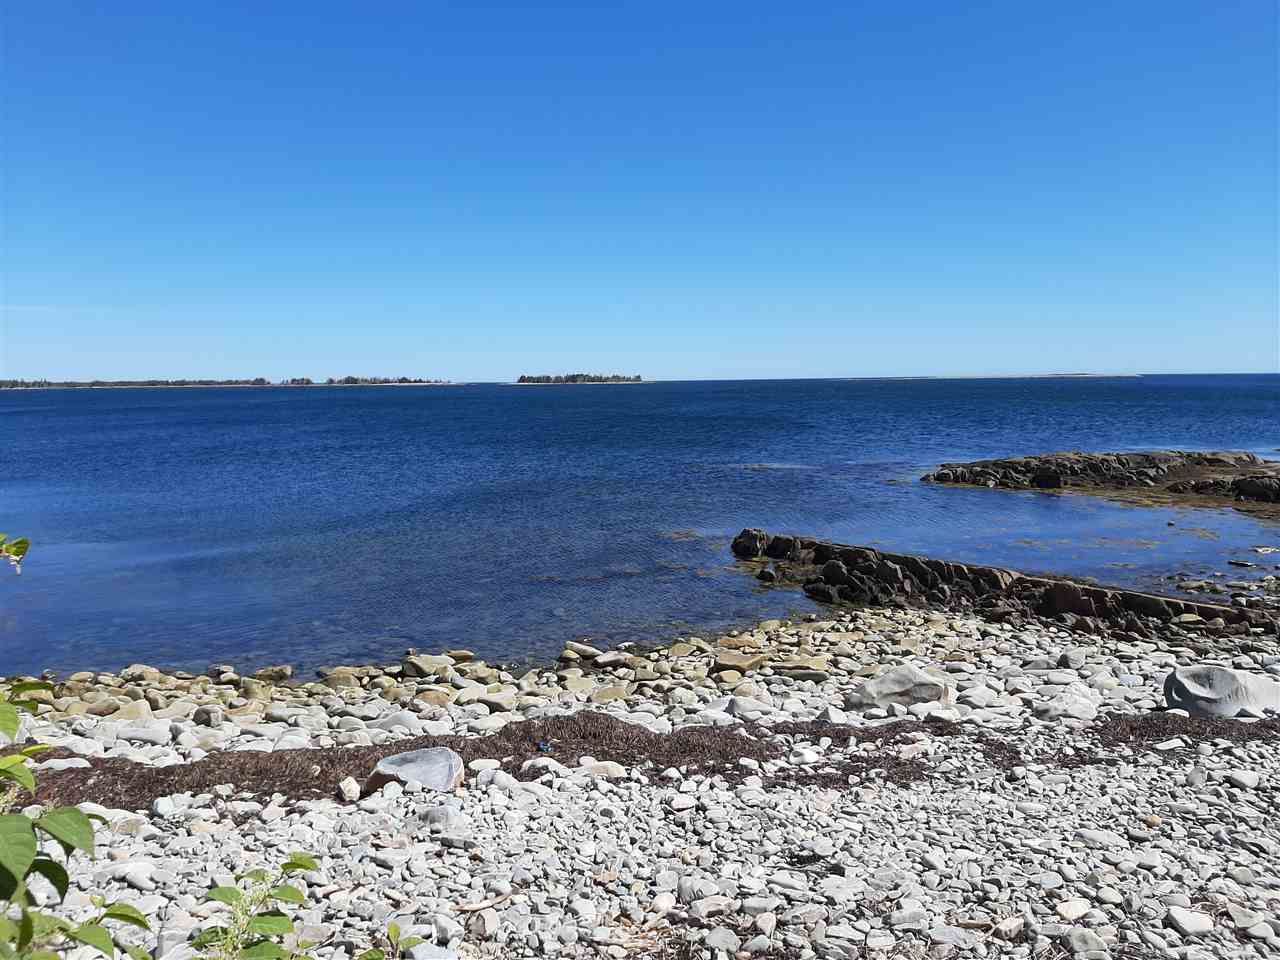 Main Photo: Lot Long Cove Road in Port Medway: 406-Queens County Vacant Land for sale (South Shore)  : MLS®# 202017267